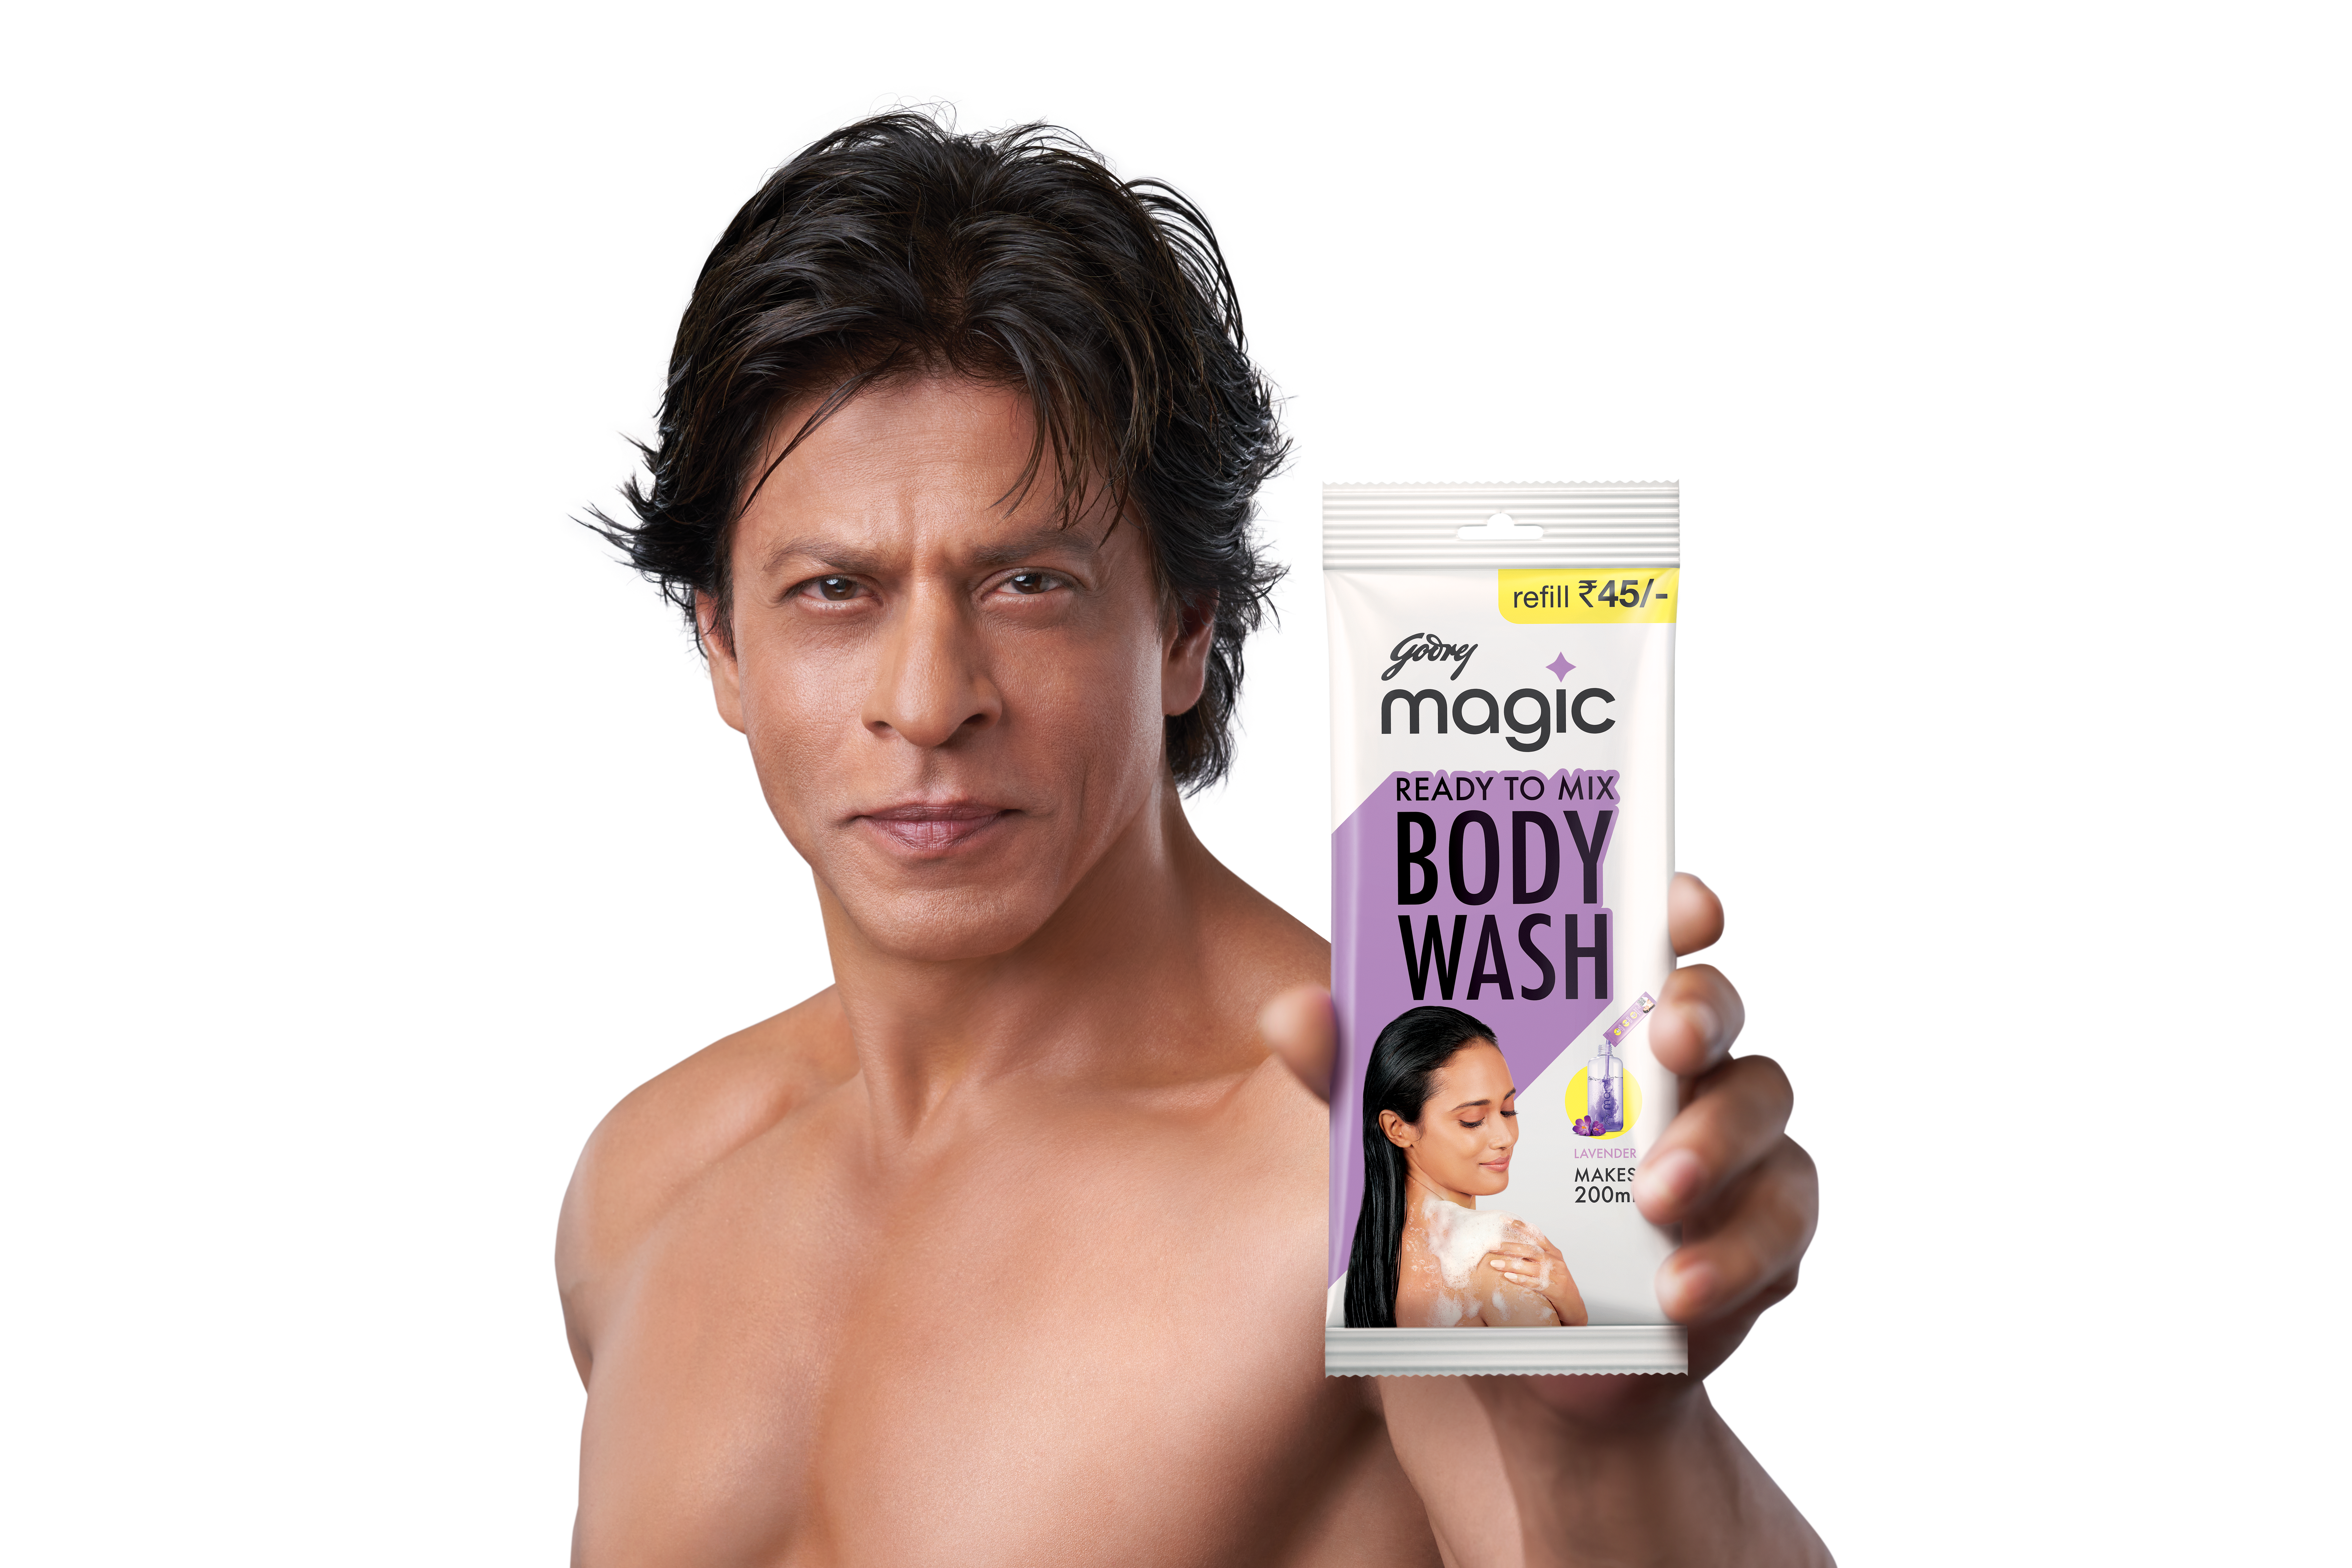 SHAH RUKH KHAN BECOMES THE FACE OF INDIA’S FIRST READY-TO-MIX